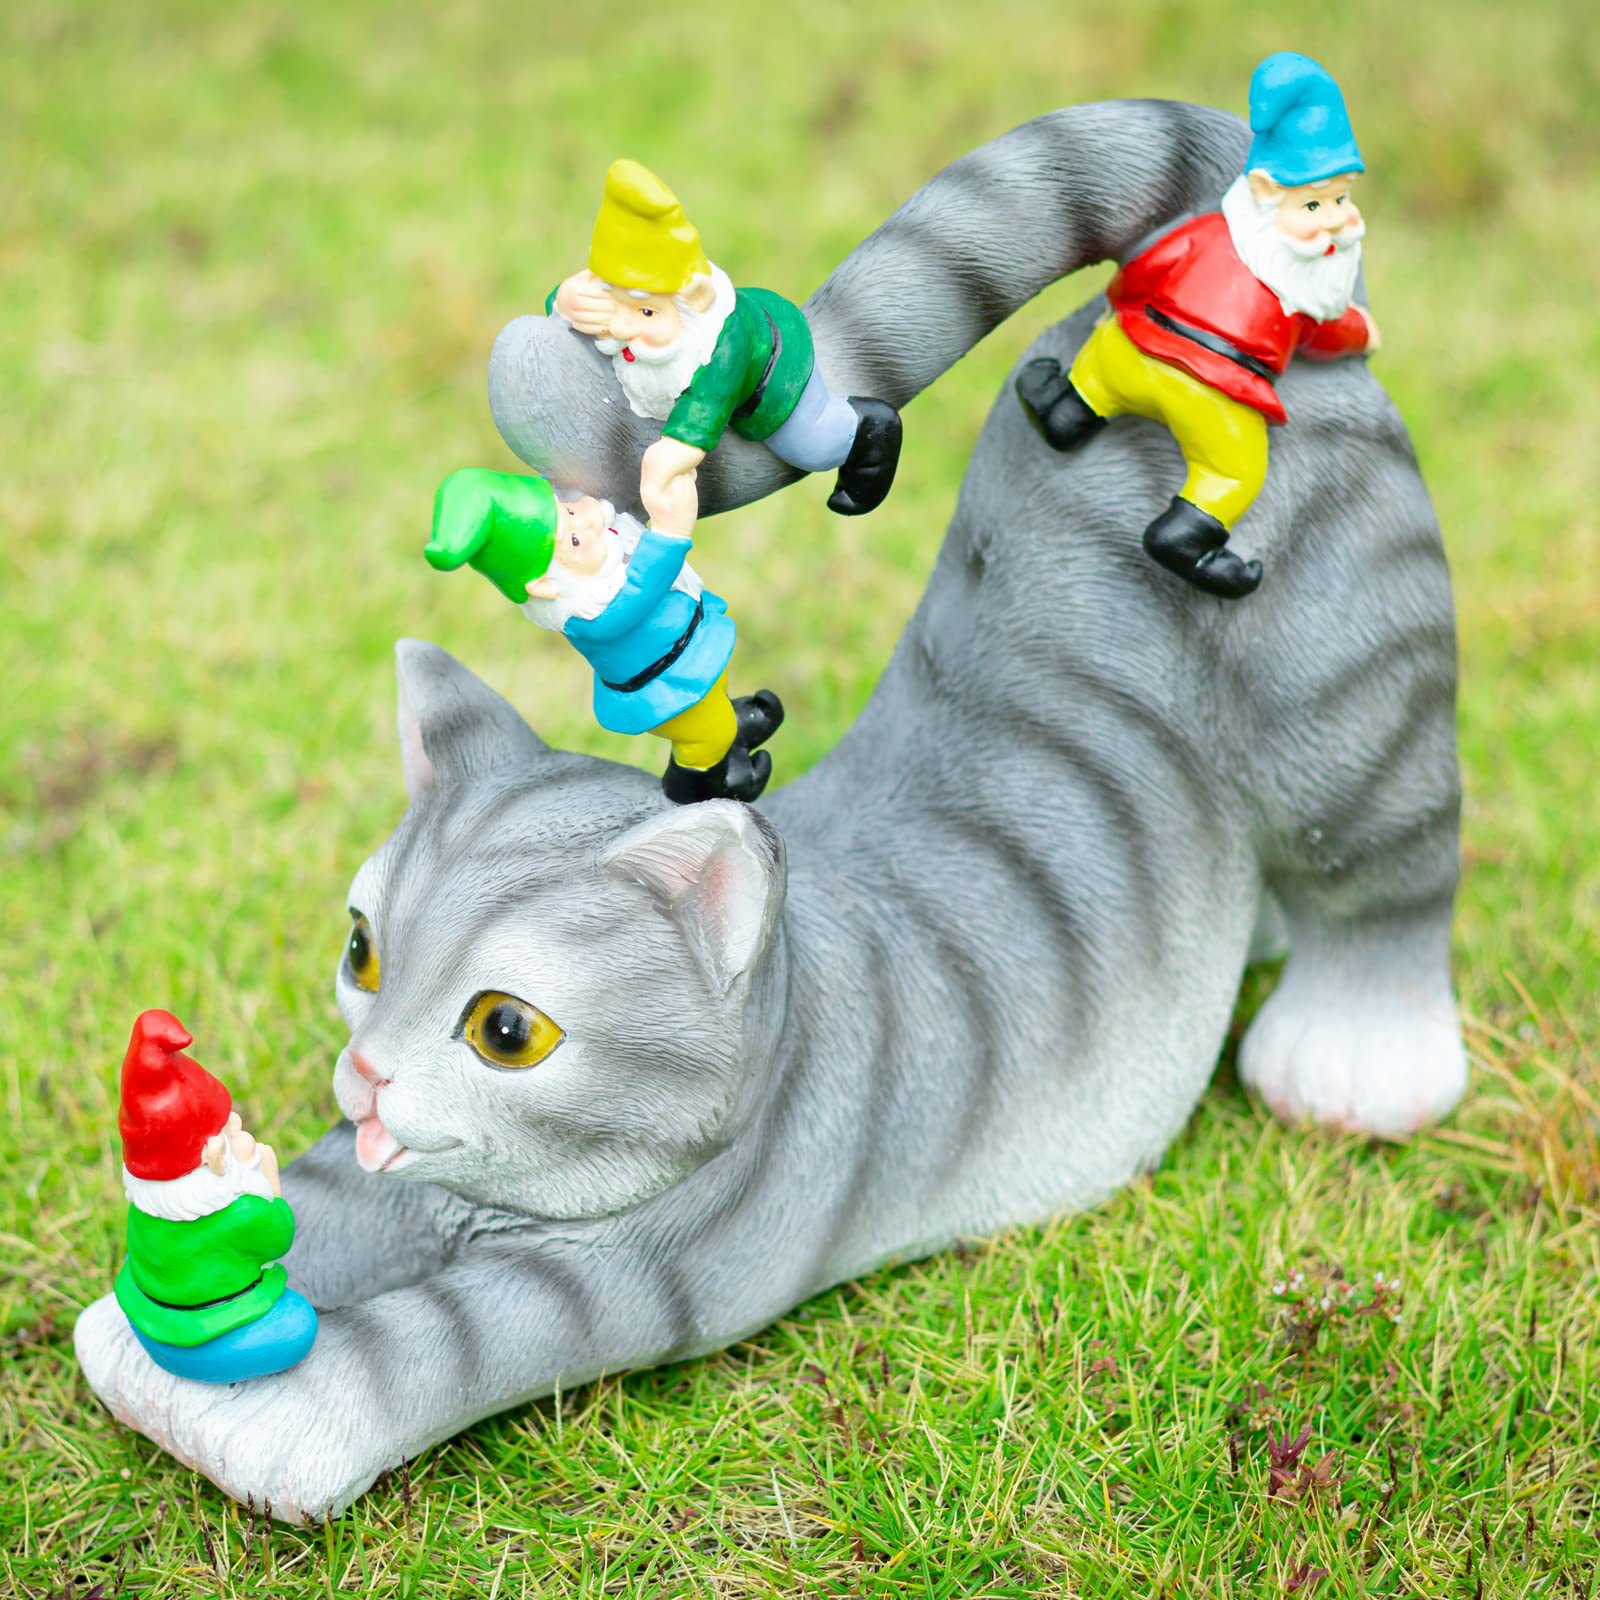 Ovewios Garden Gnome Statue Outdoor Decor - Cat Garden Gnome Statues Yard Art for Home Indoor Outdoor Patio Lawn Cat Gifts Cat and Gnomes